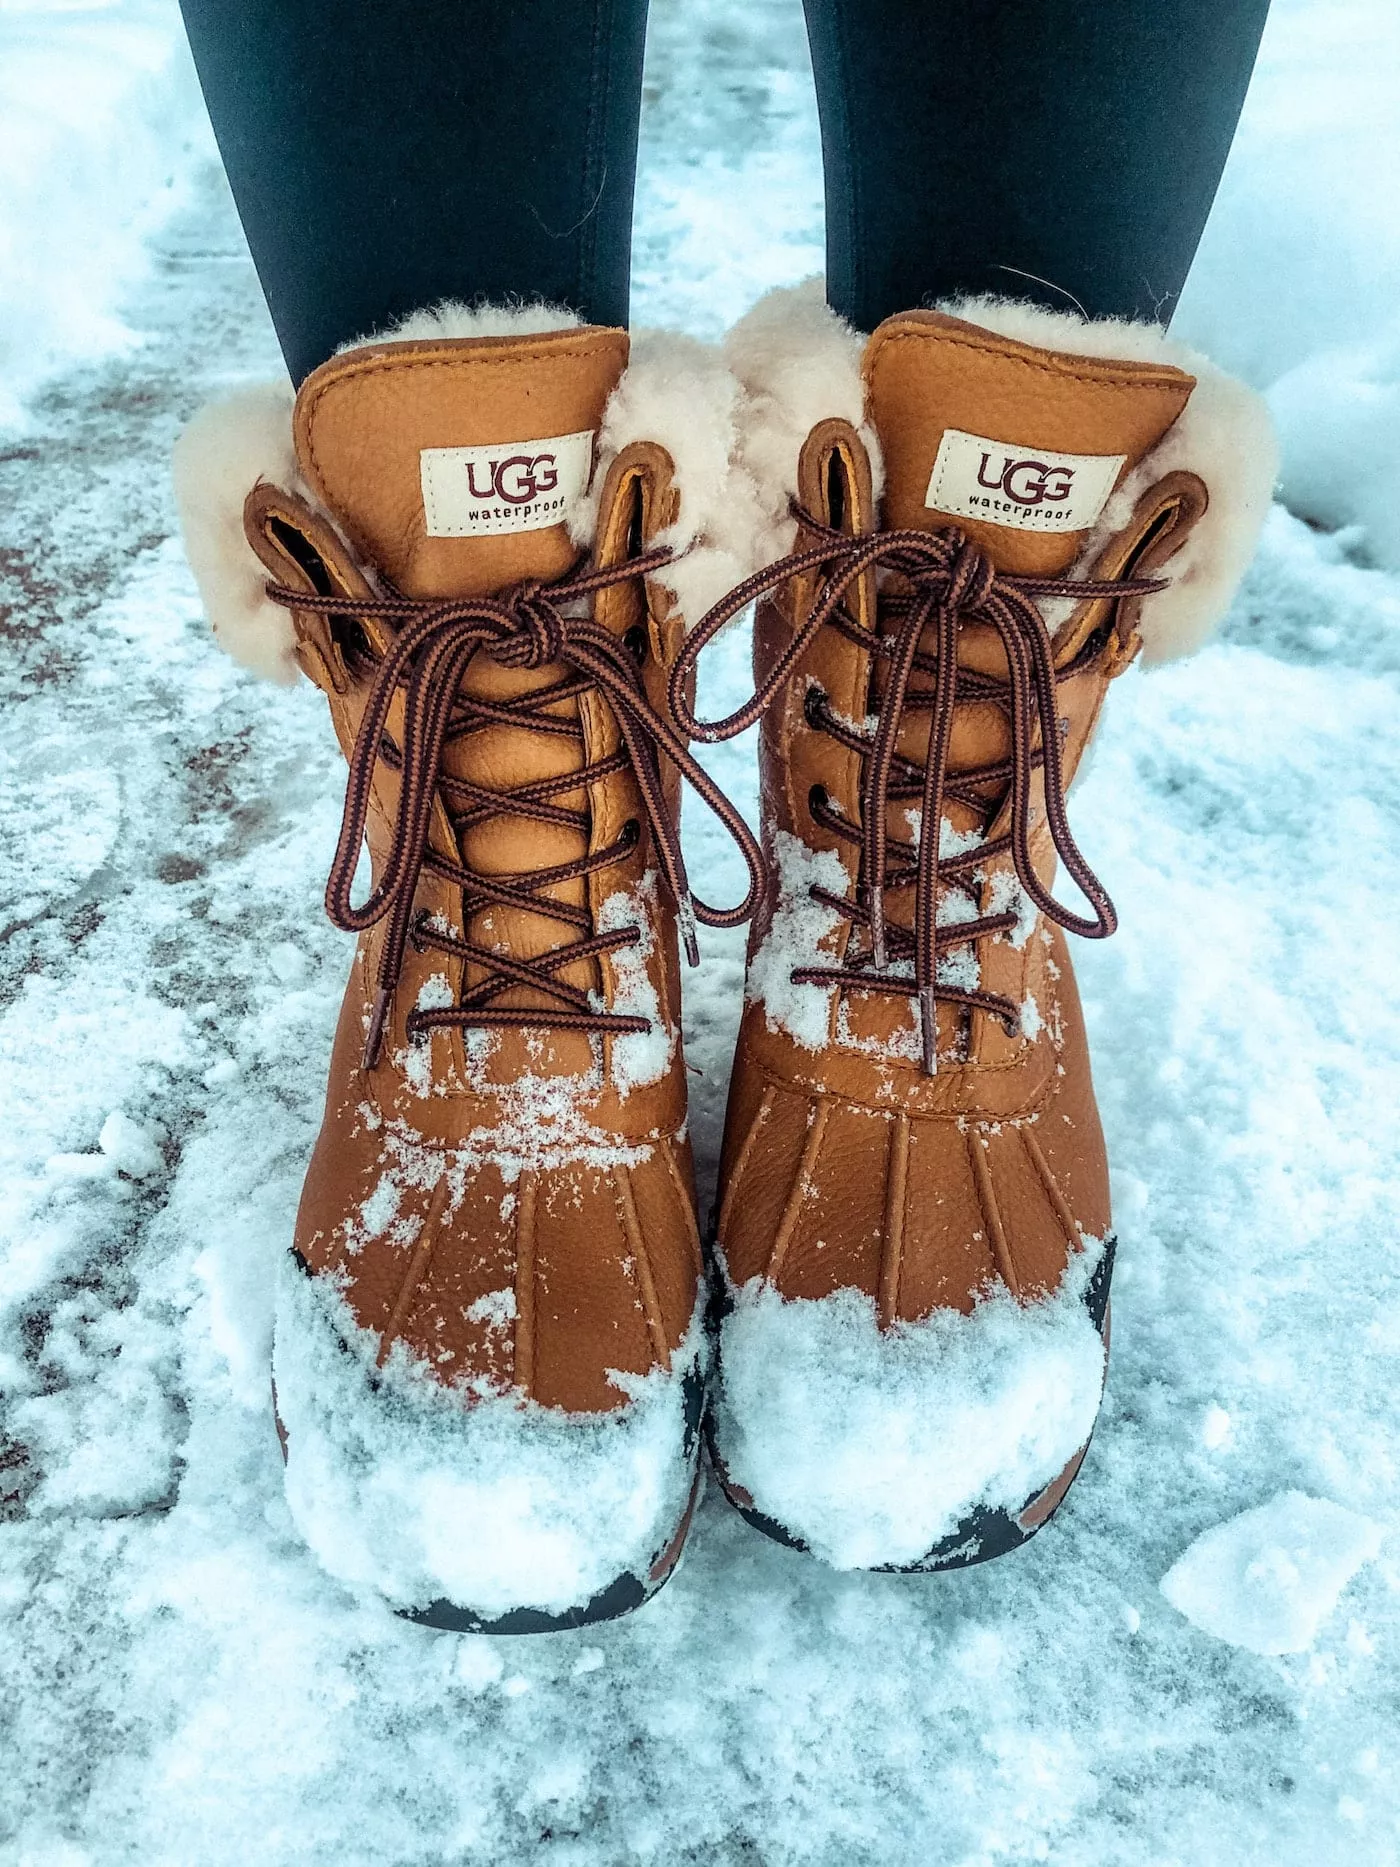 Stay Stylish and Warm with These Winter
Boots for Women